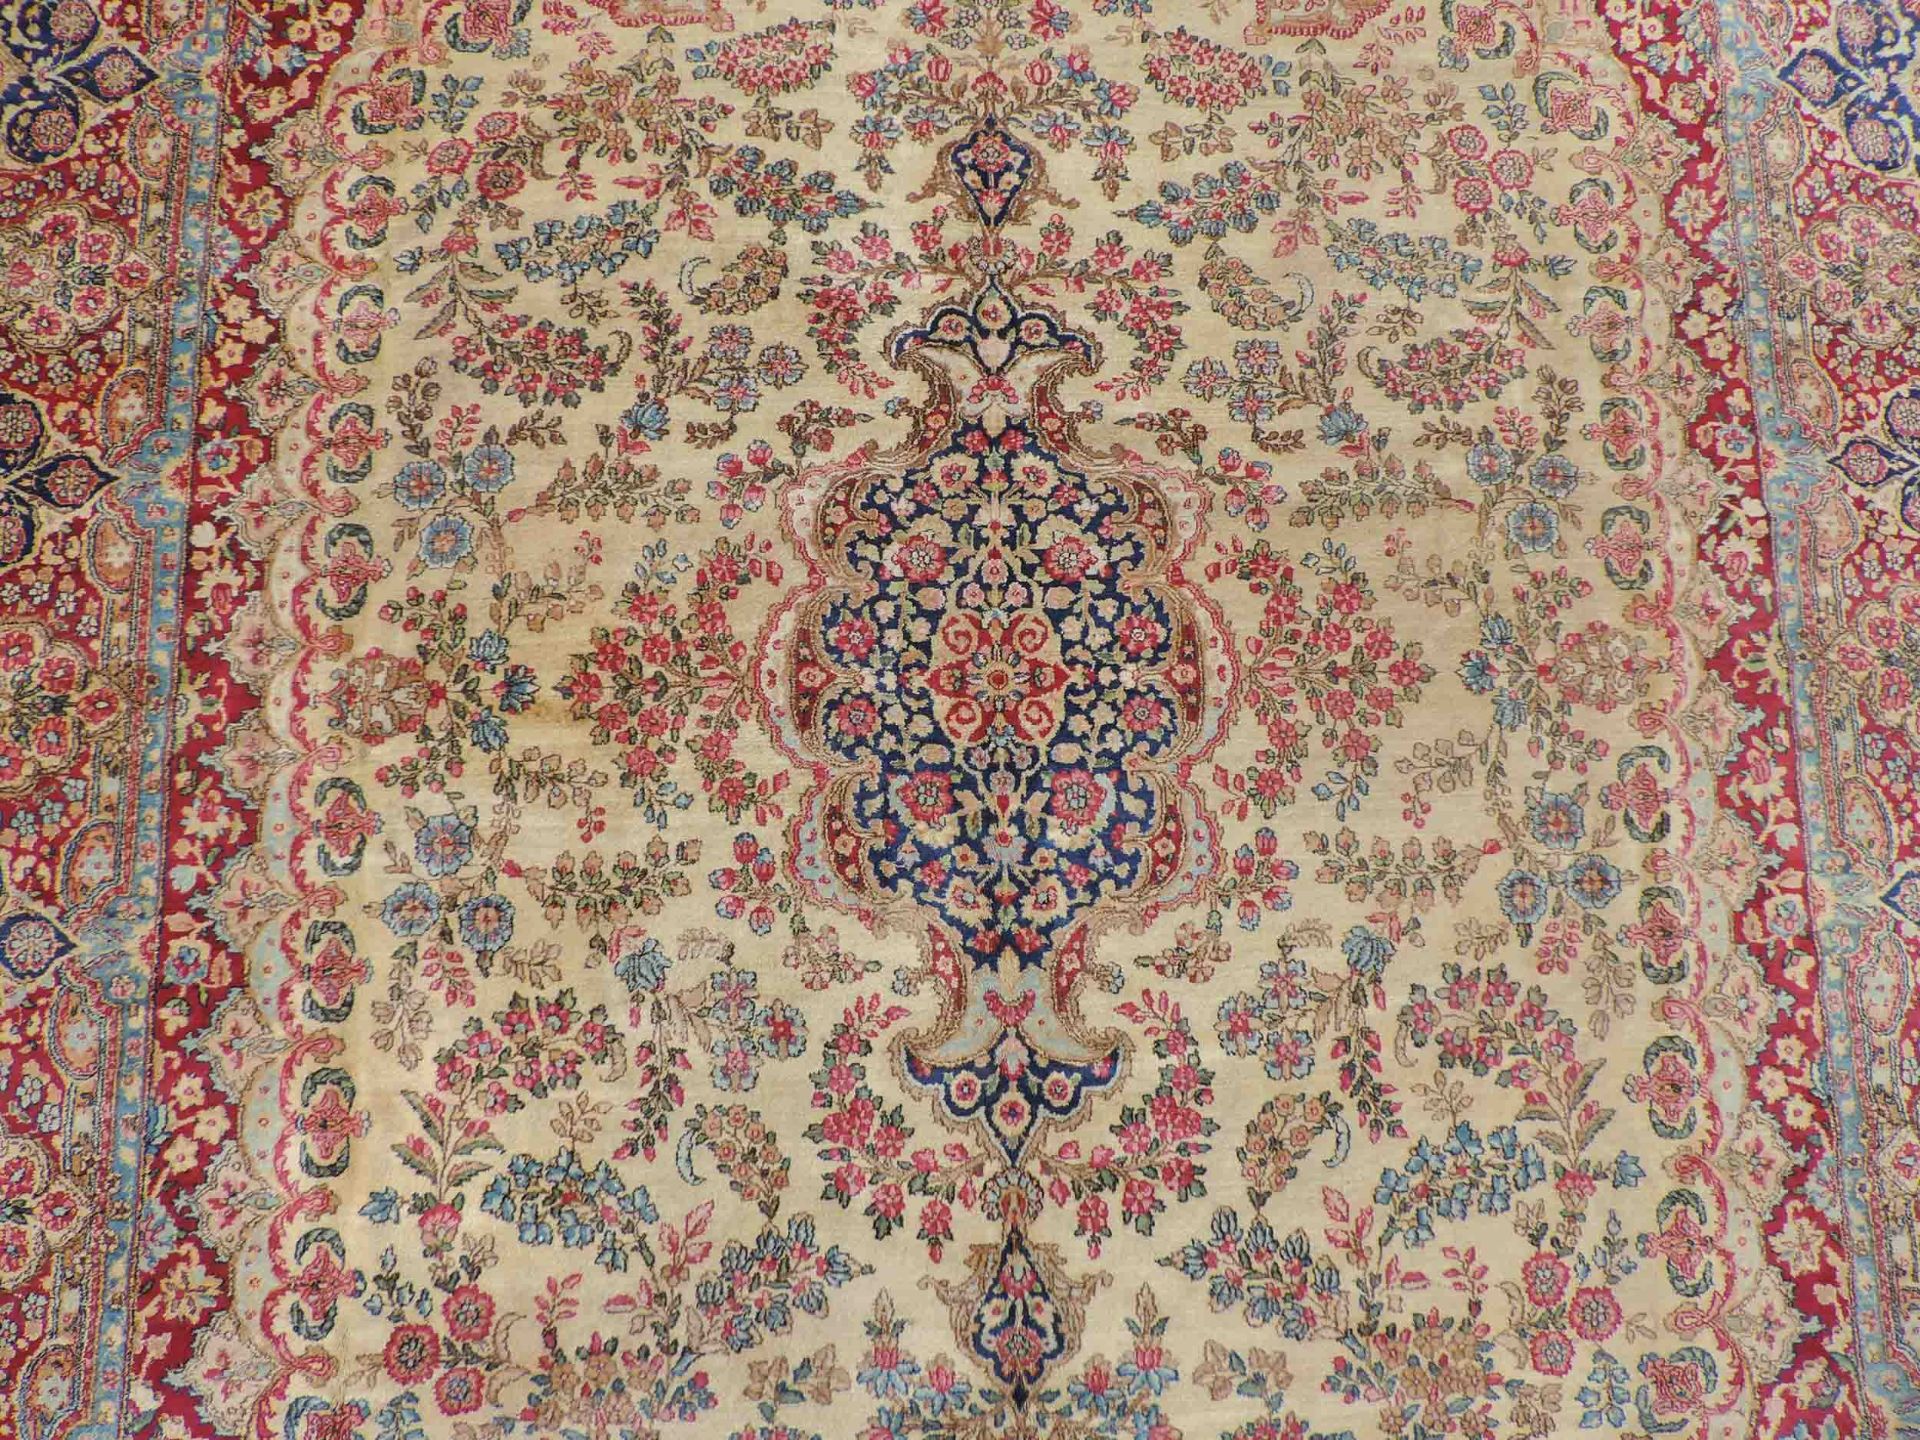 Kirman Persian carpet. Iran. Old, 1st half of the 20th century.420 cm x 297 cm. Knotted by hand. - Image 11 of 14